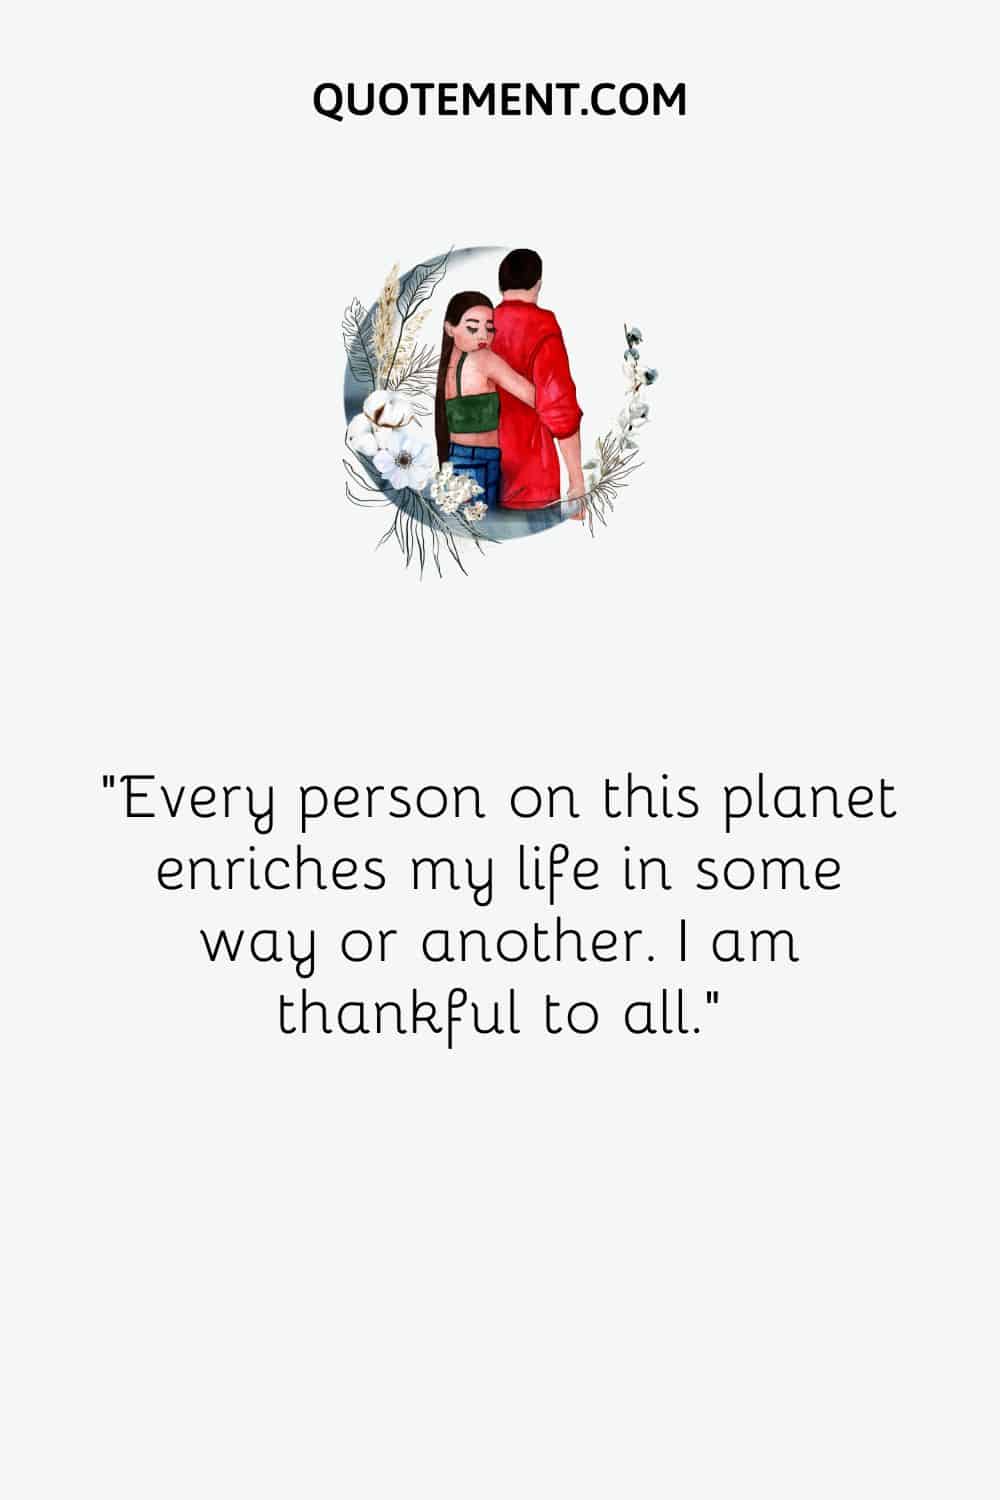 Every person on this planet enriches my life in some way or another. I am thankful to all